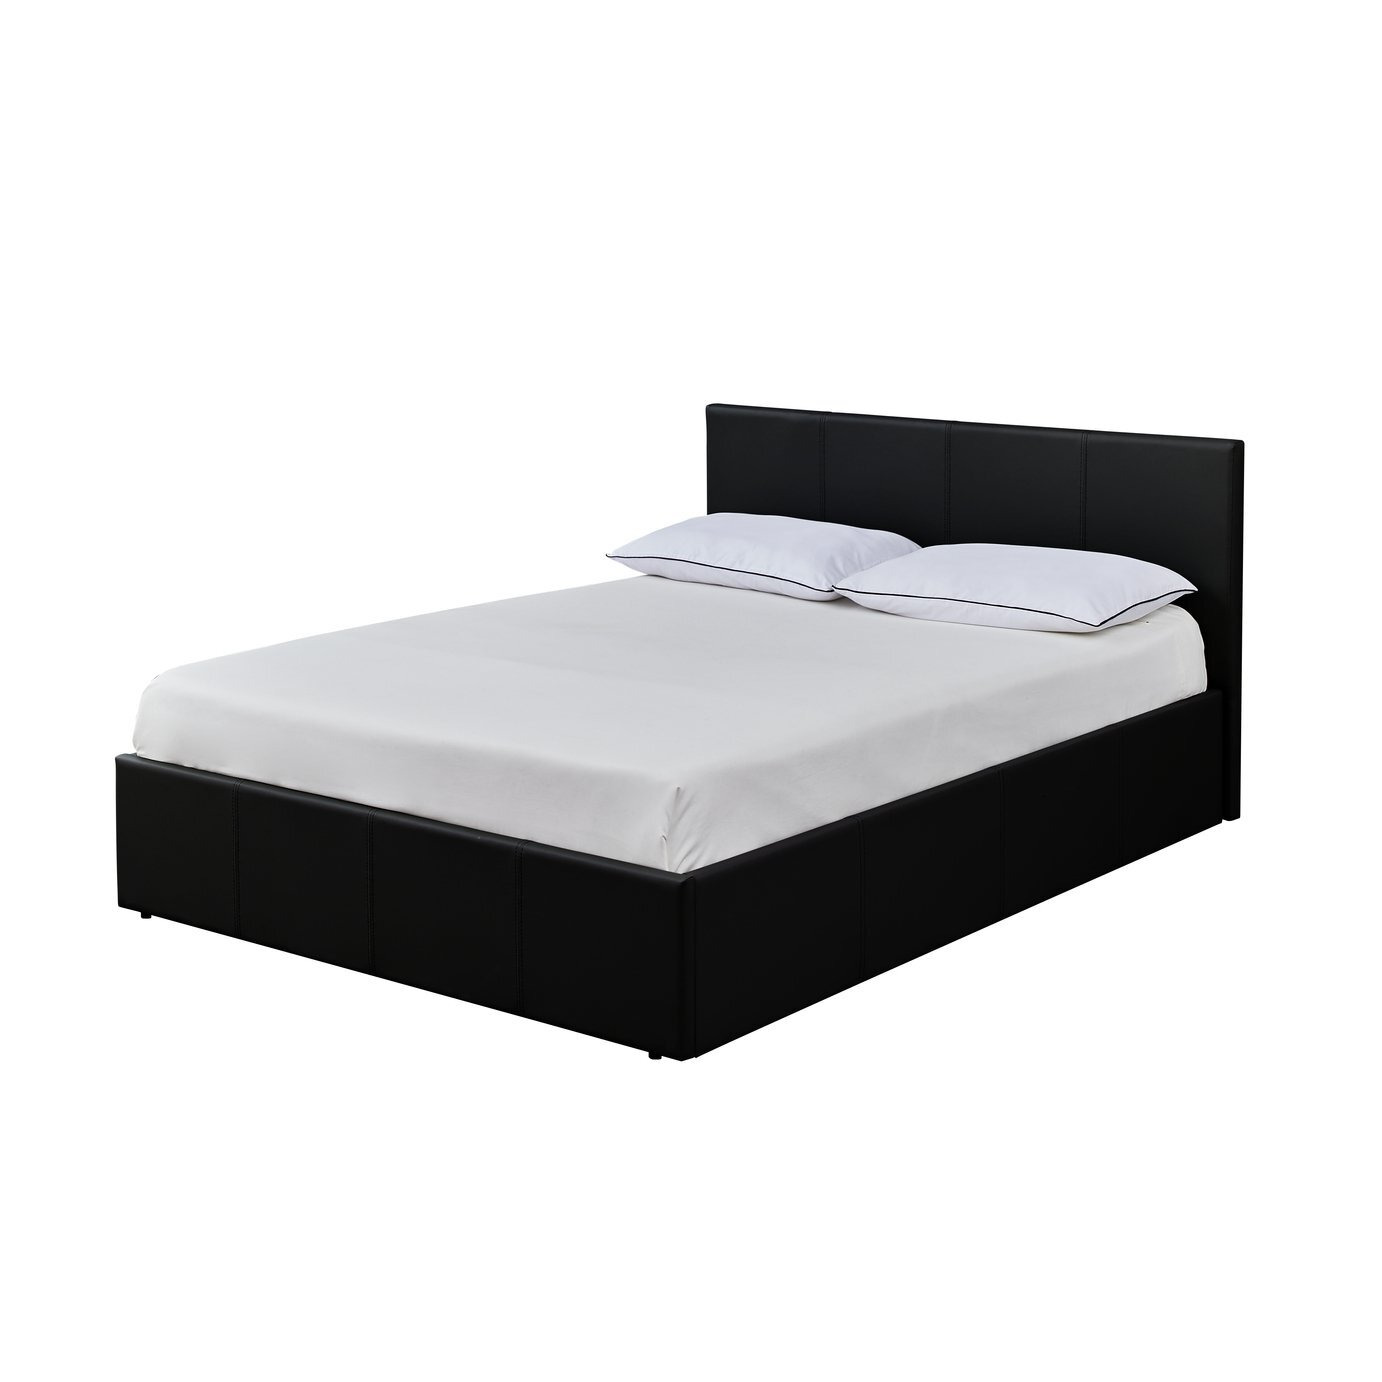 Argos Home Lavendon Small Double End Opening Bed Frame-Black - image 1